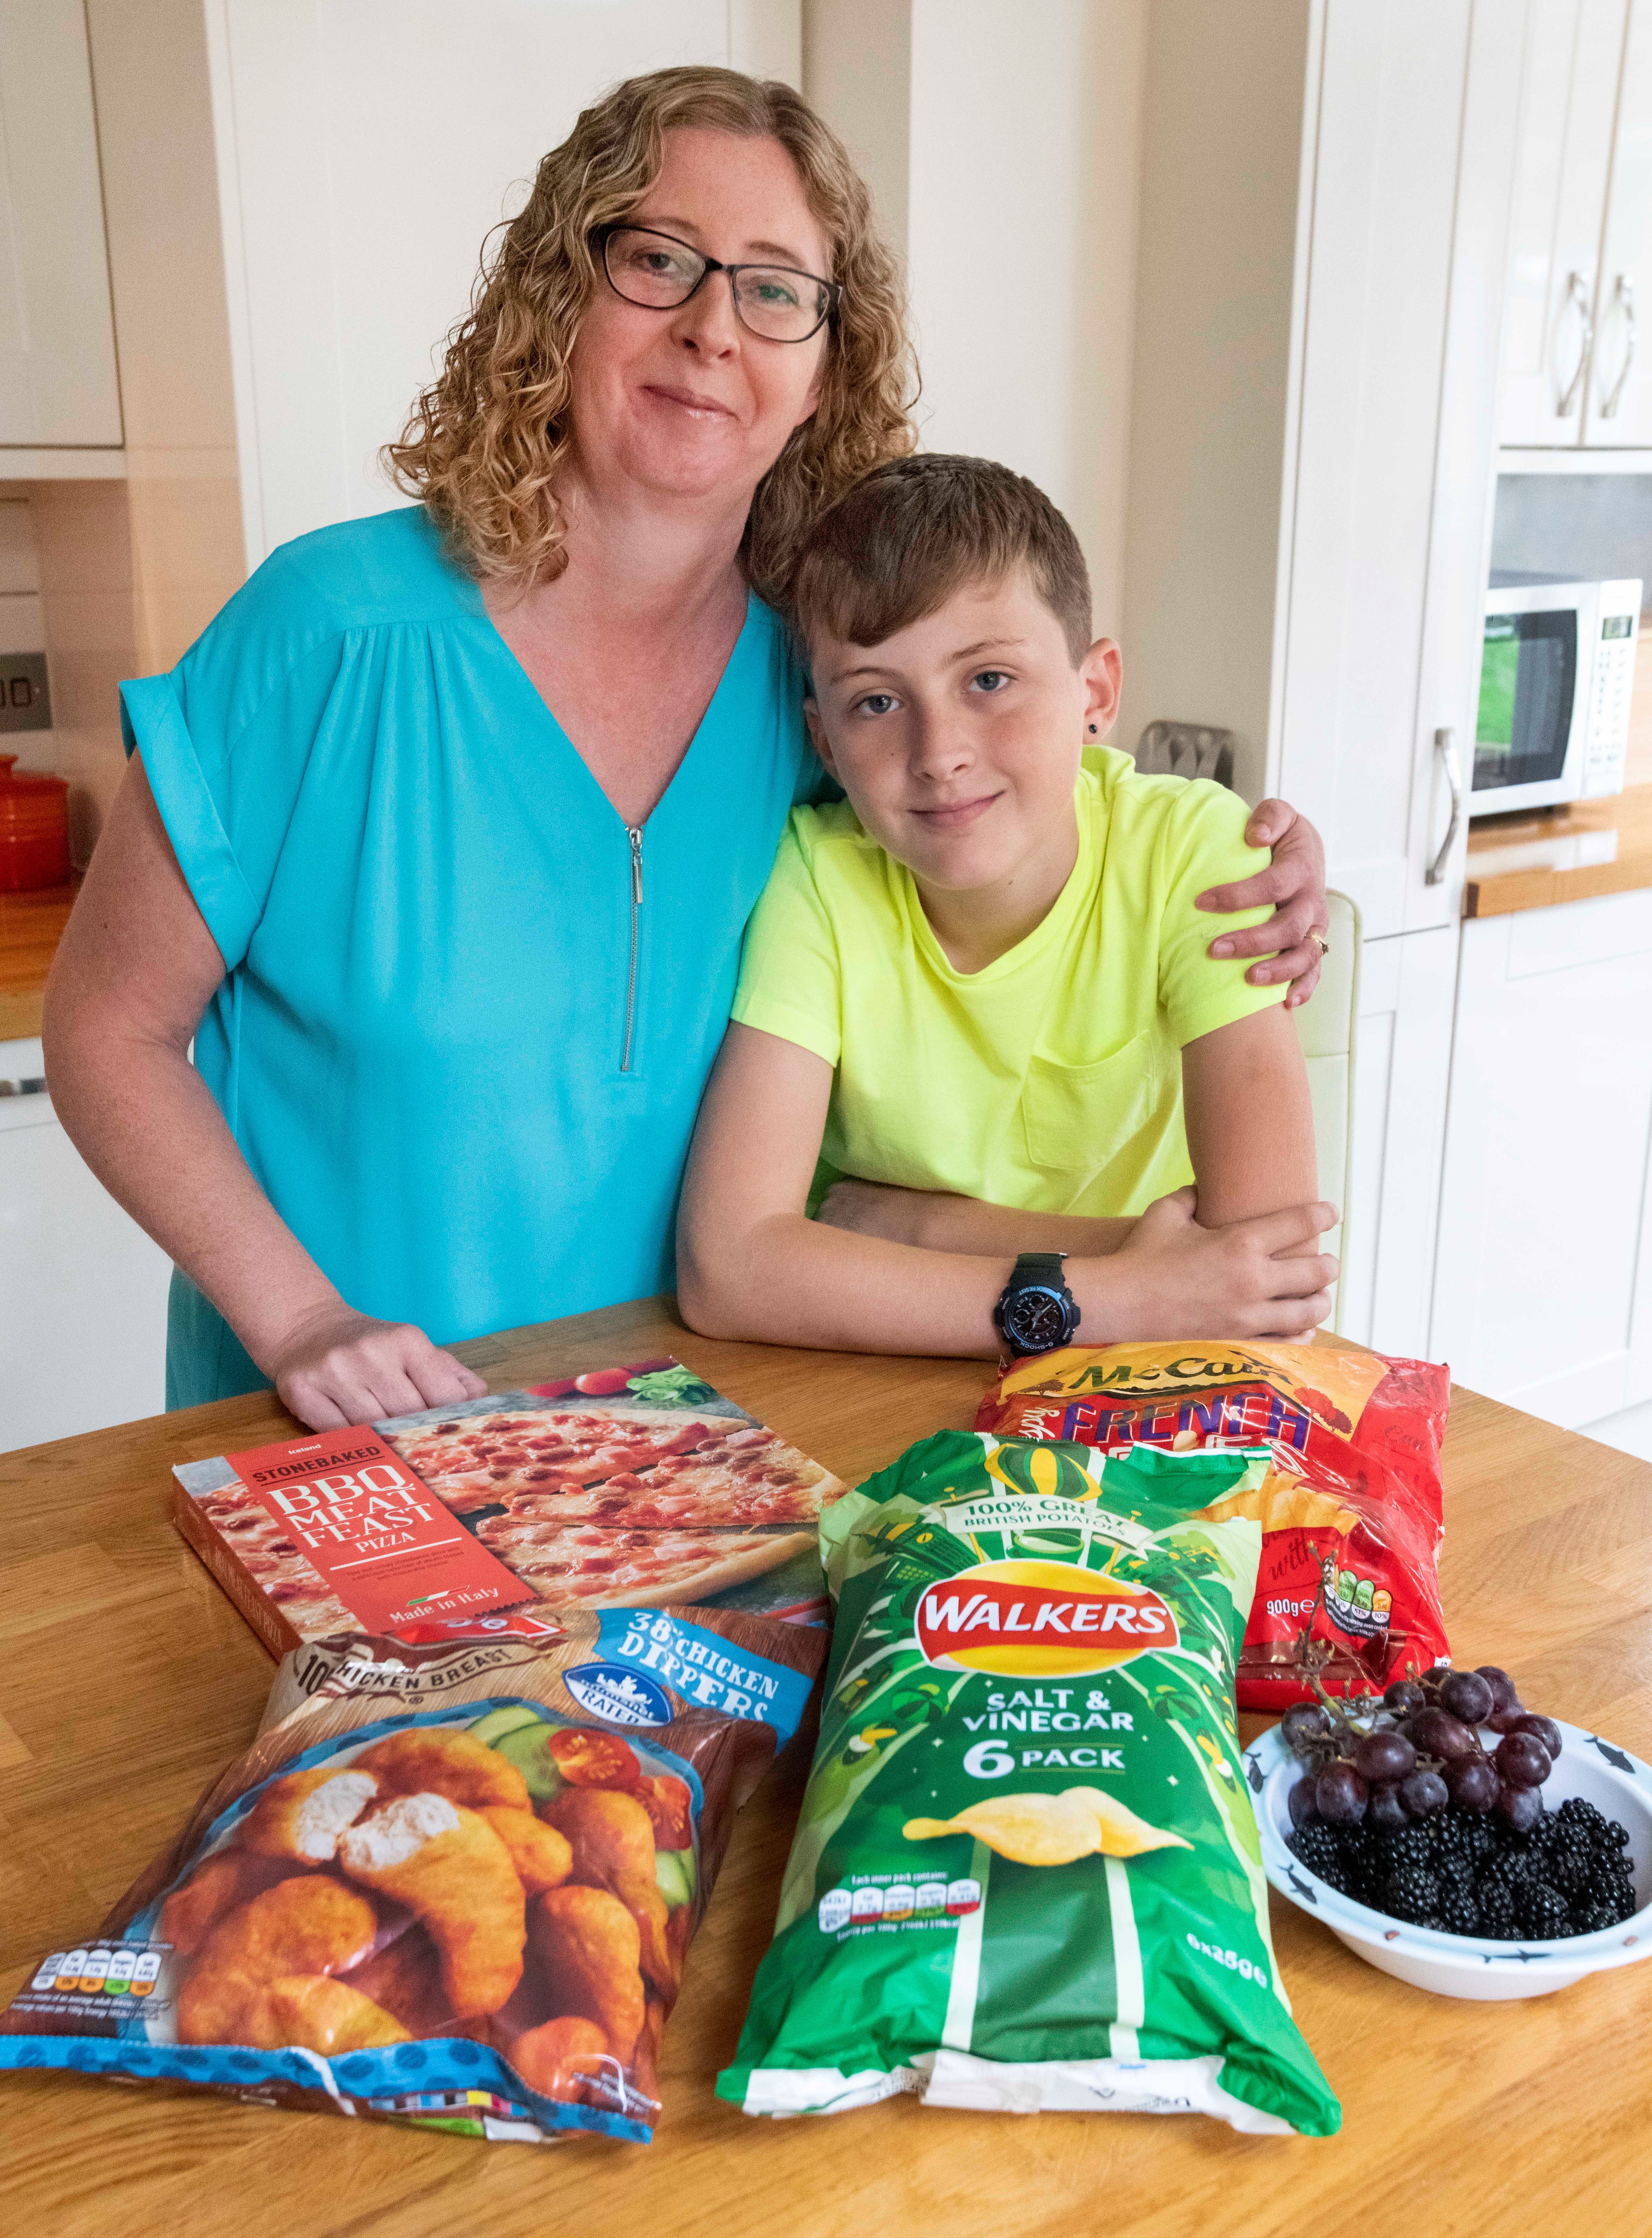  George's mum Tracy struggled with filling his school lunchbox with foods he'd actually eat